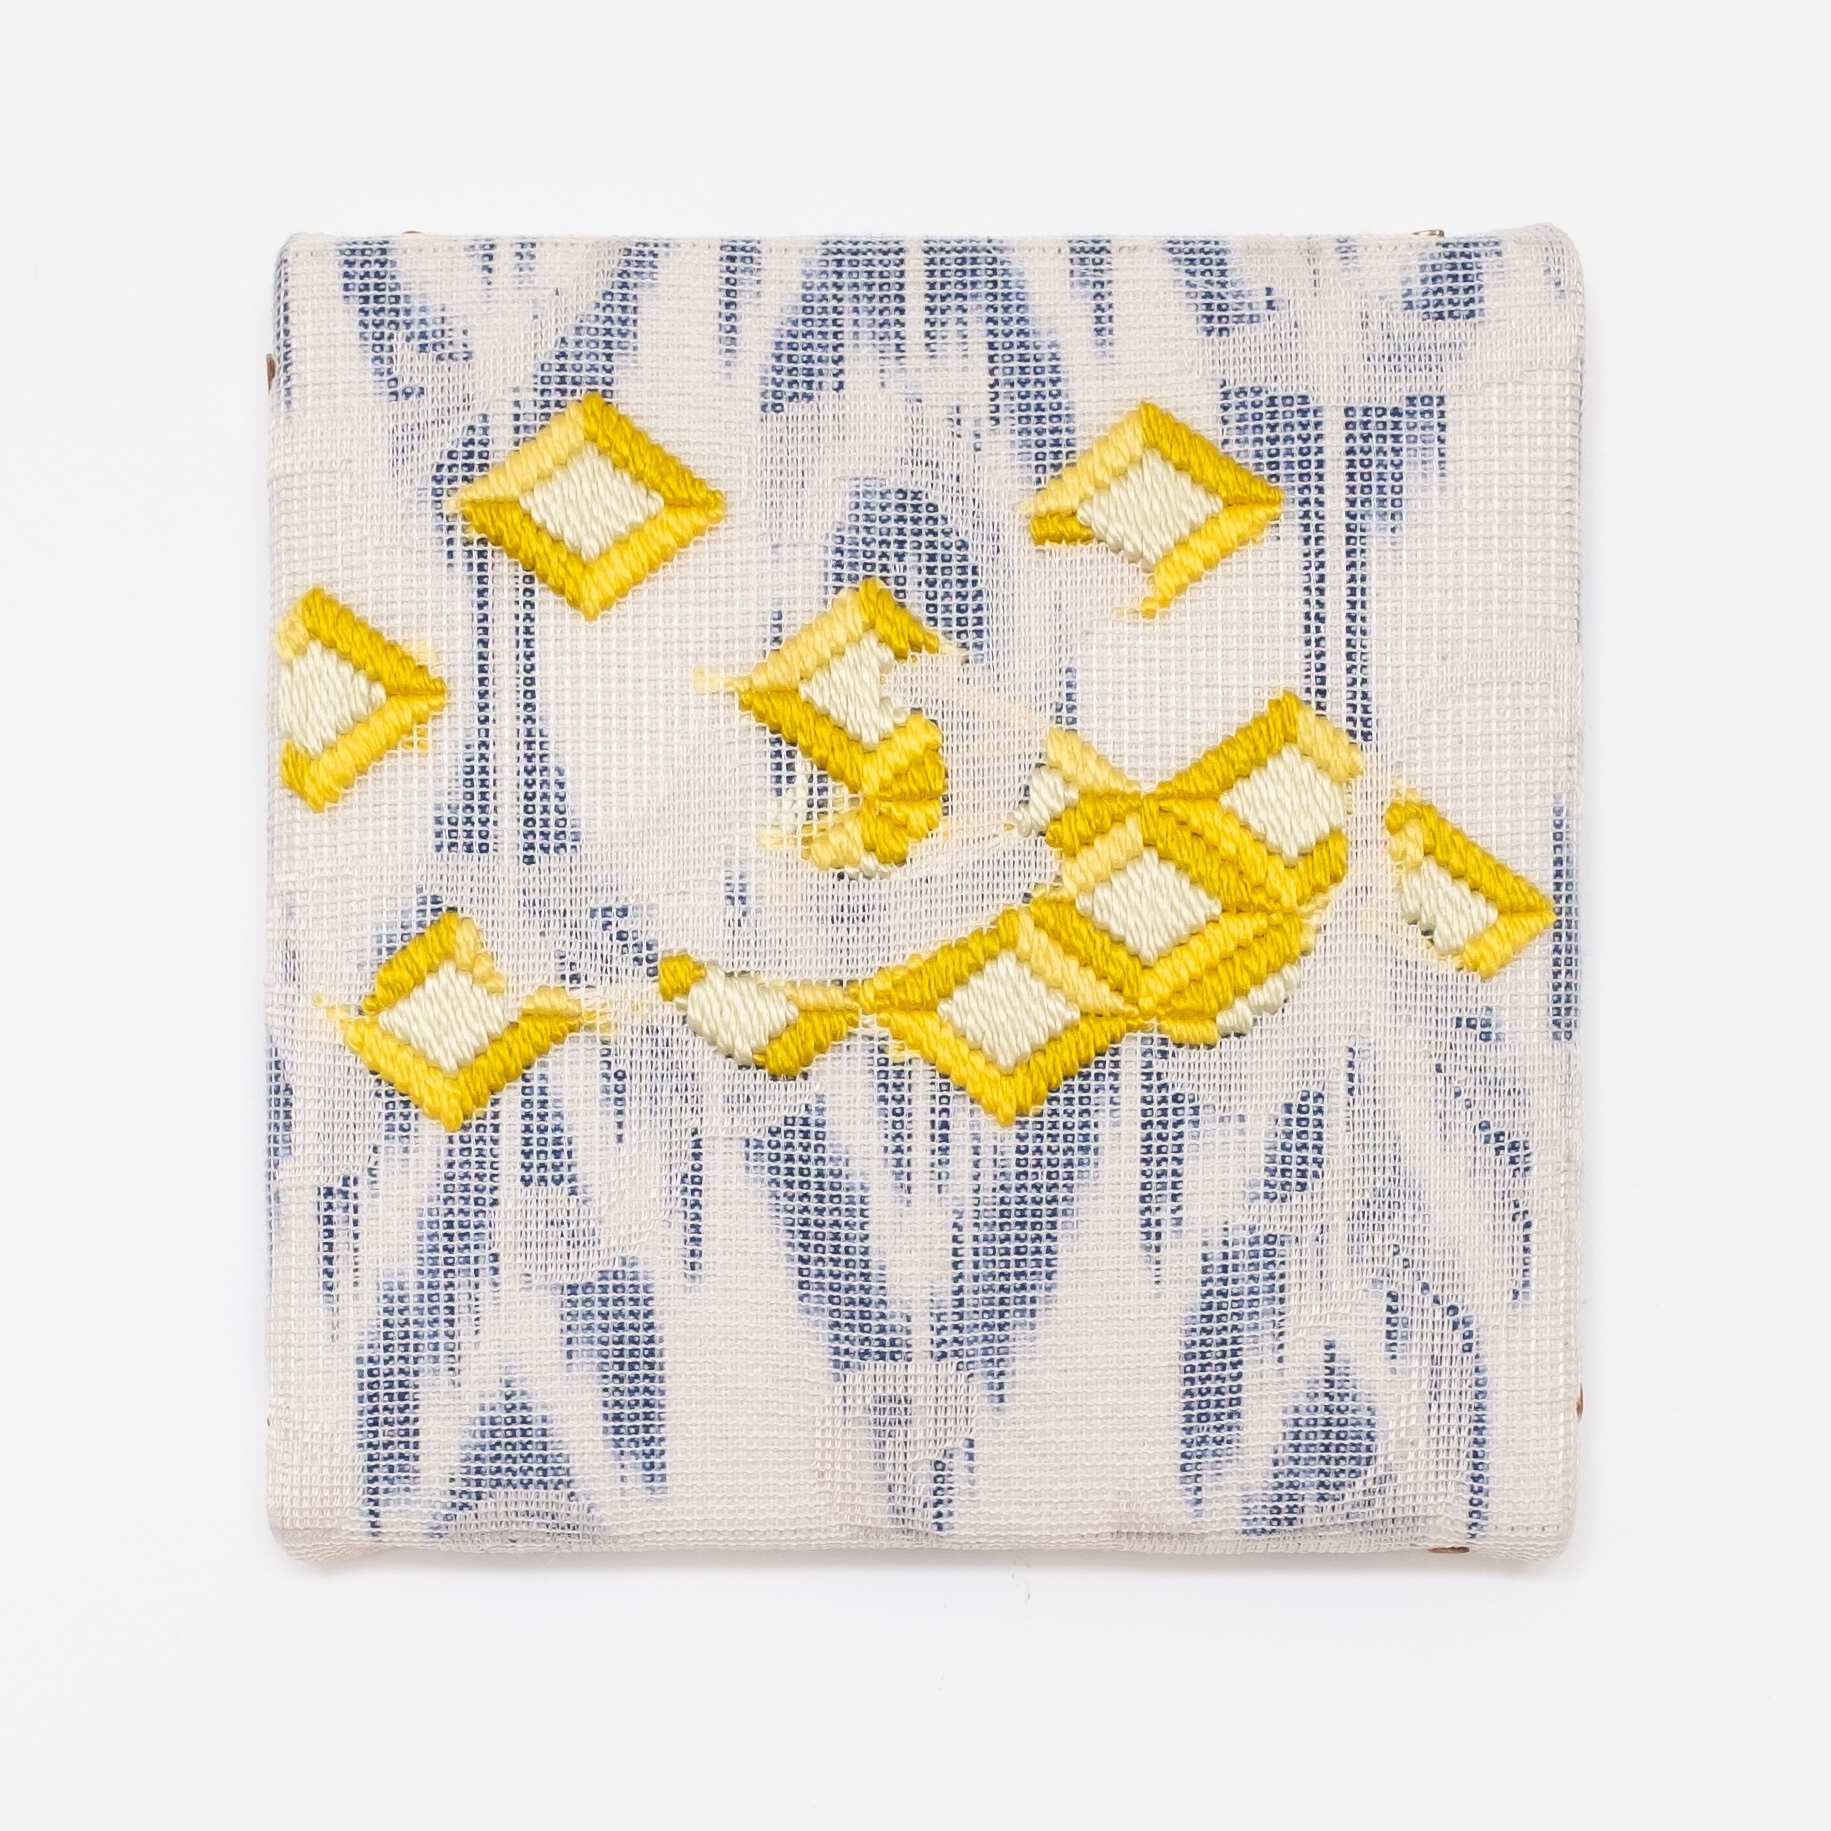 Triple-layer gather-gusset [yellow diamonds], Hand-embroidered silk on lace over fabric, 2019